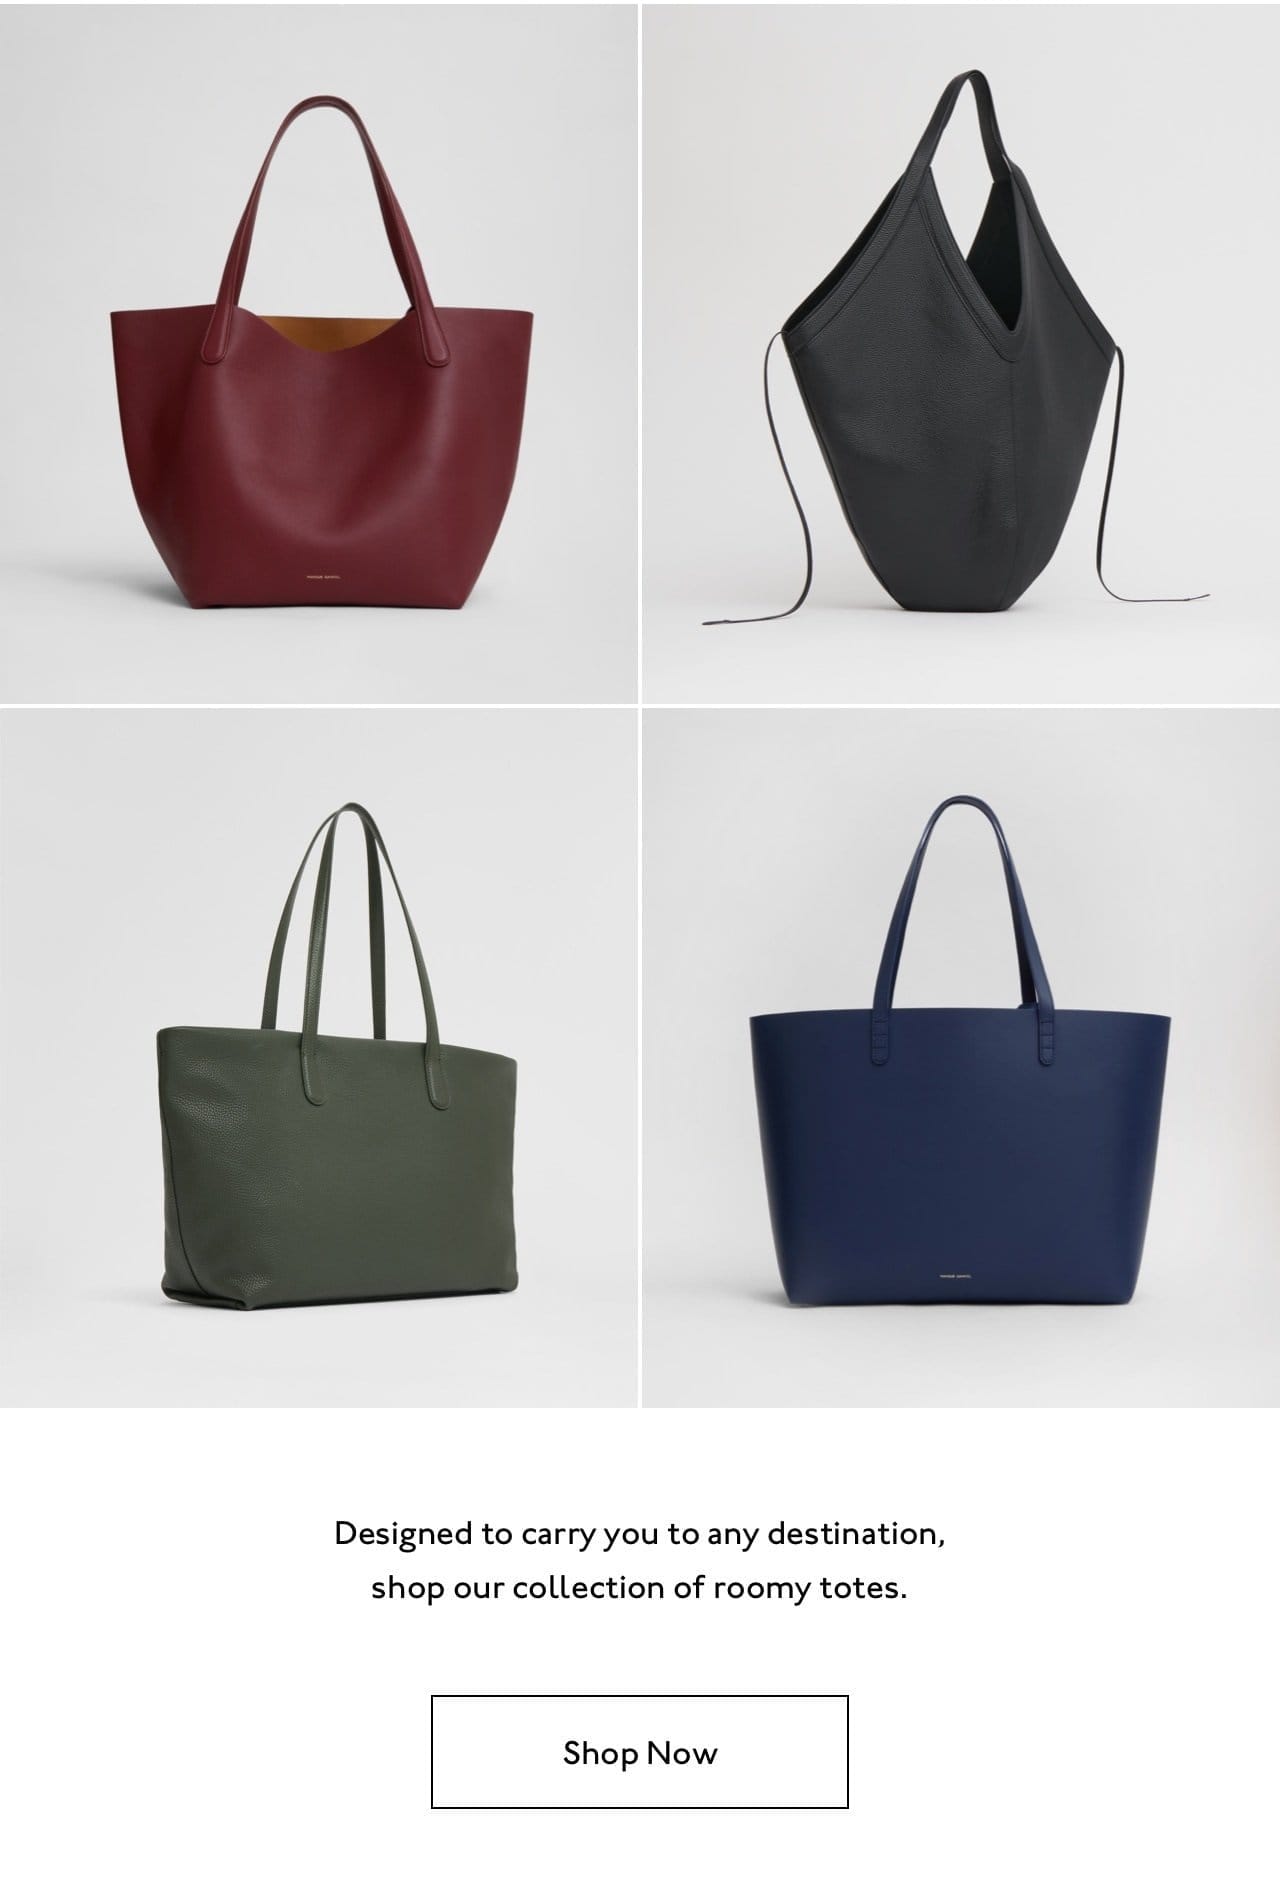 Designed to carry you to any destination, shop our collection of roomy totes.